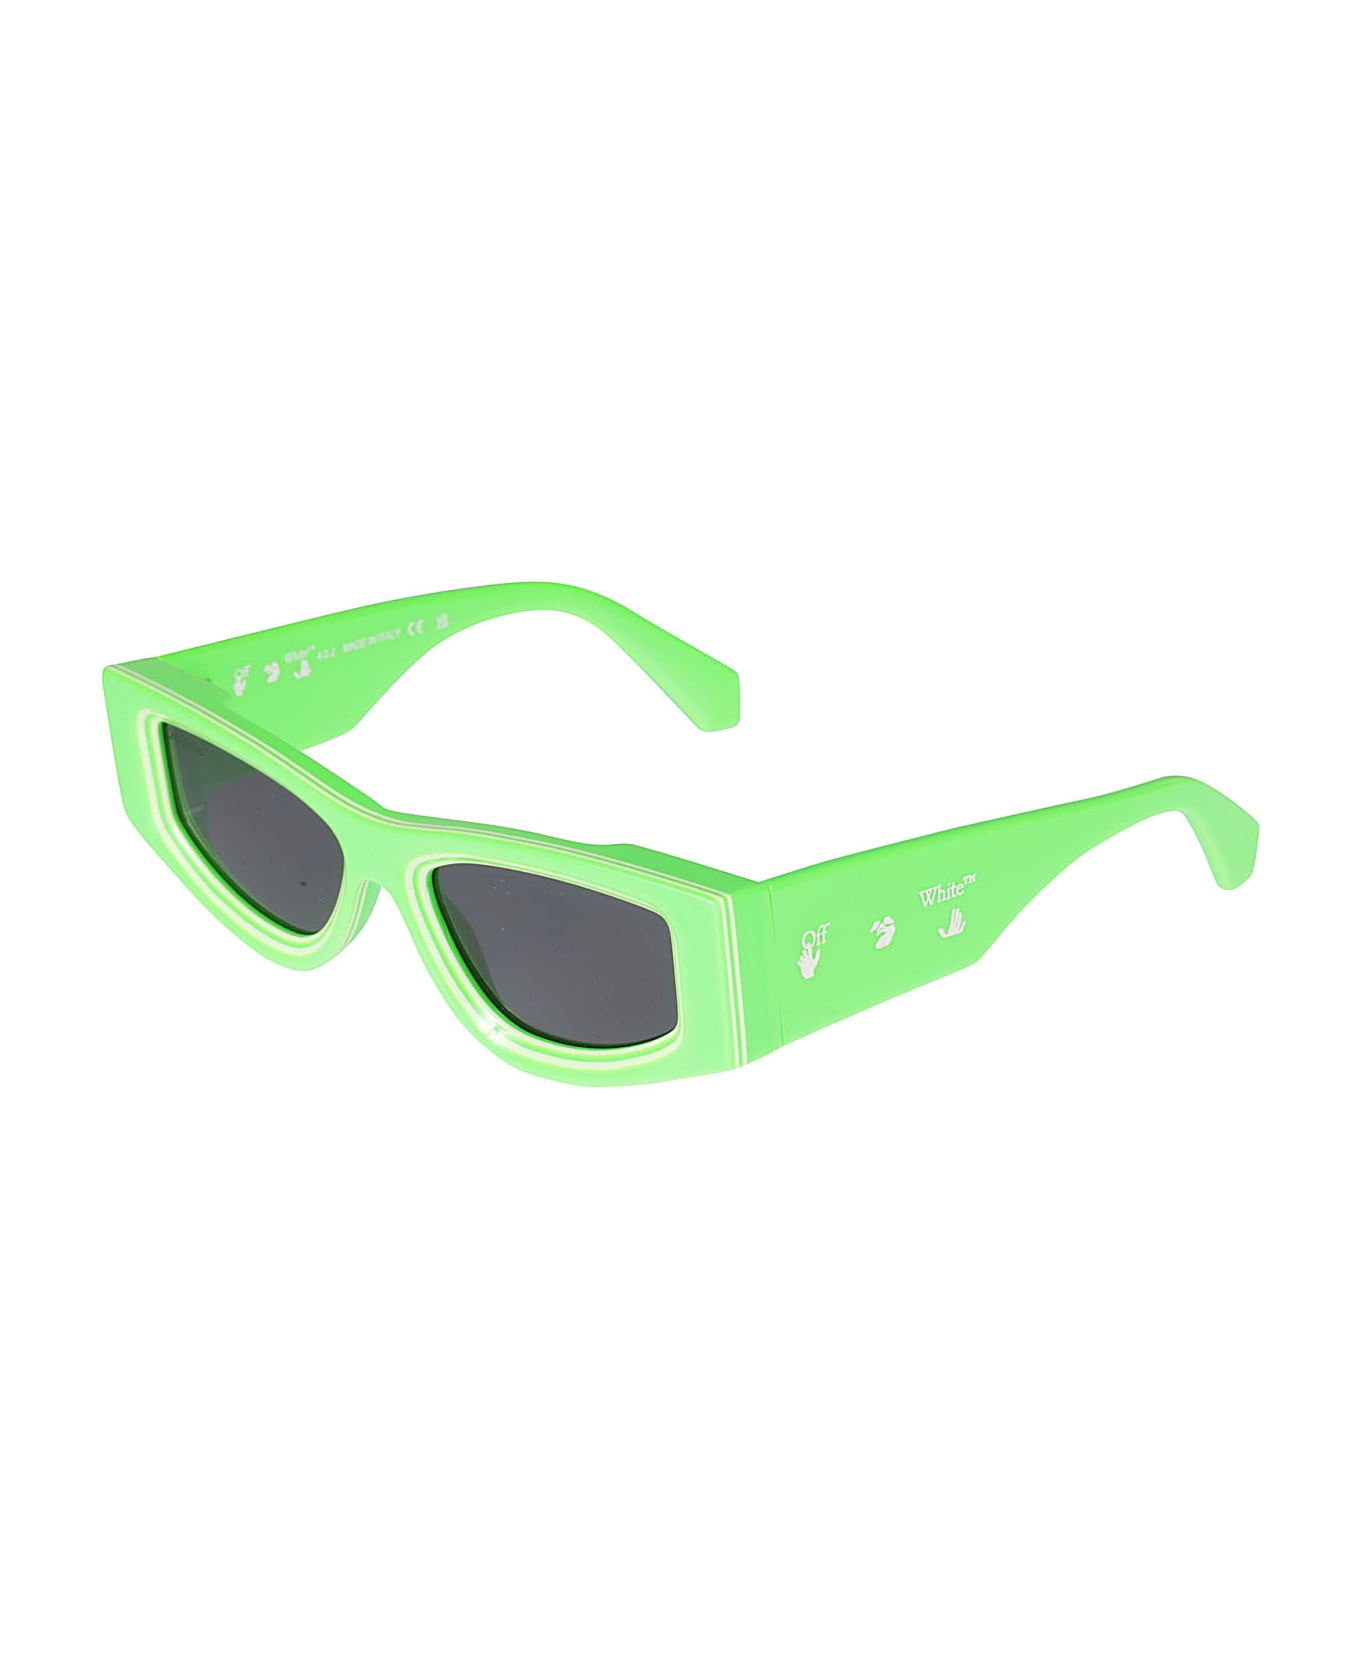 Off-White Andy Sunglasses - Green